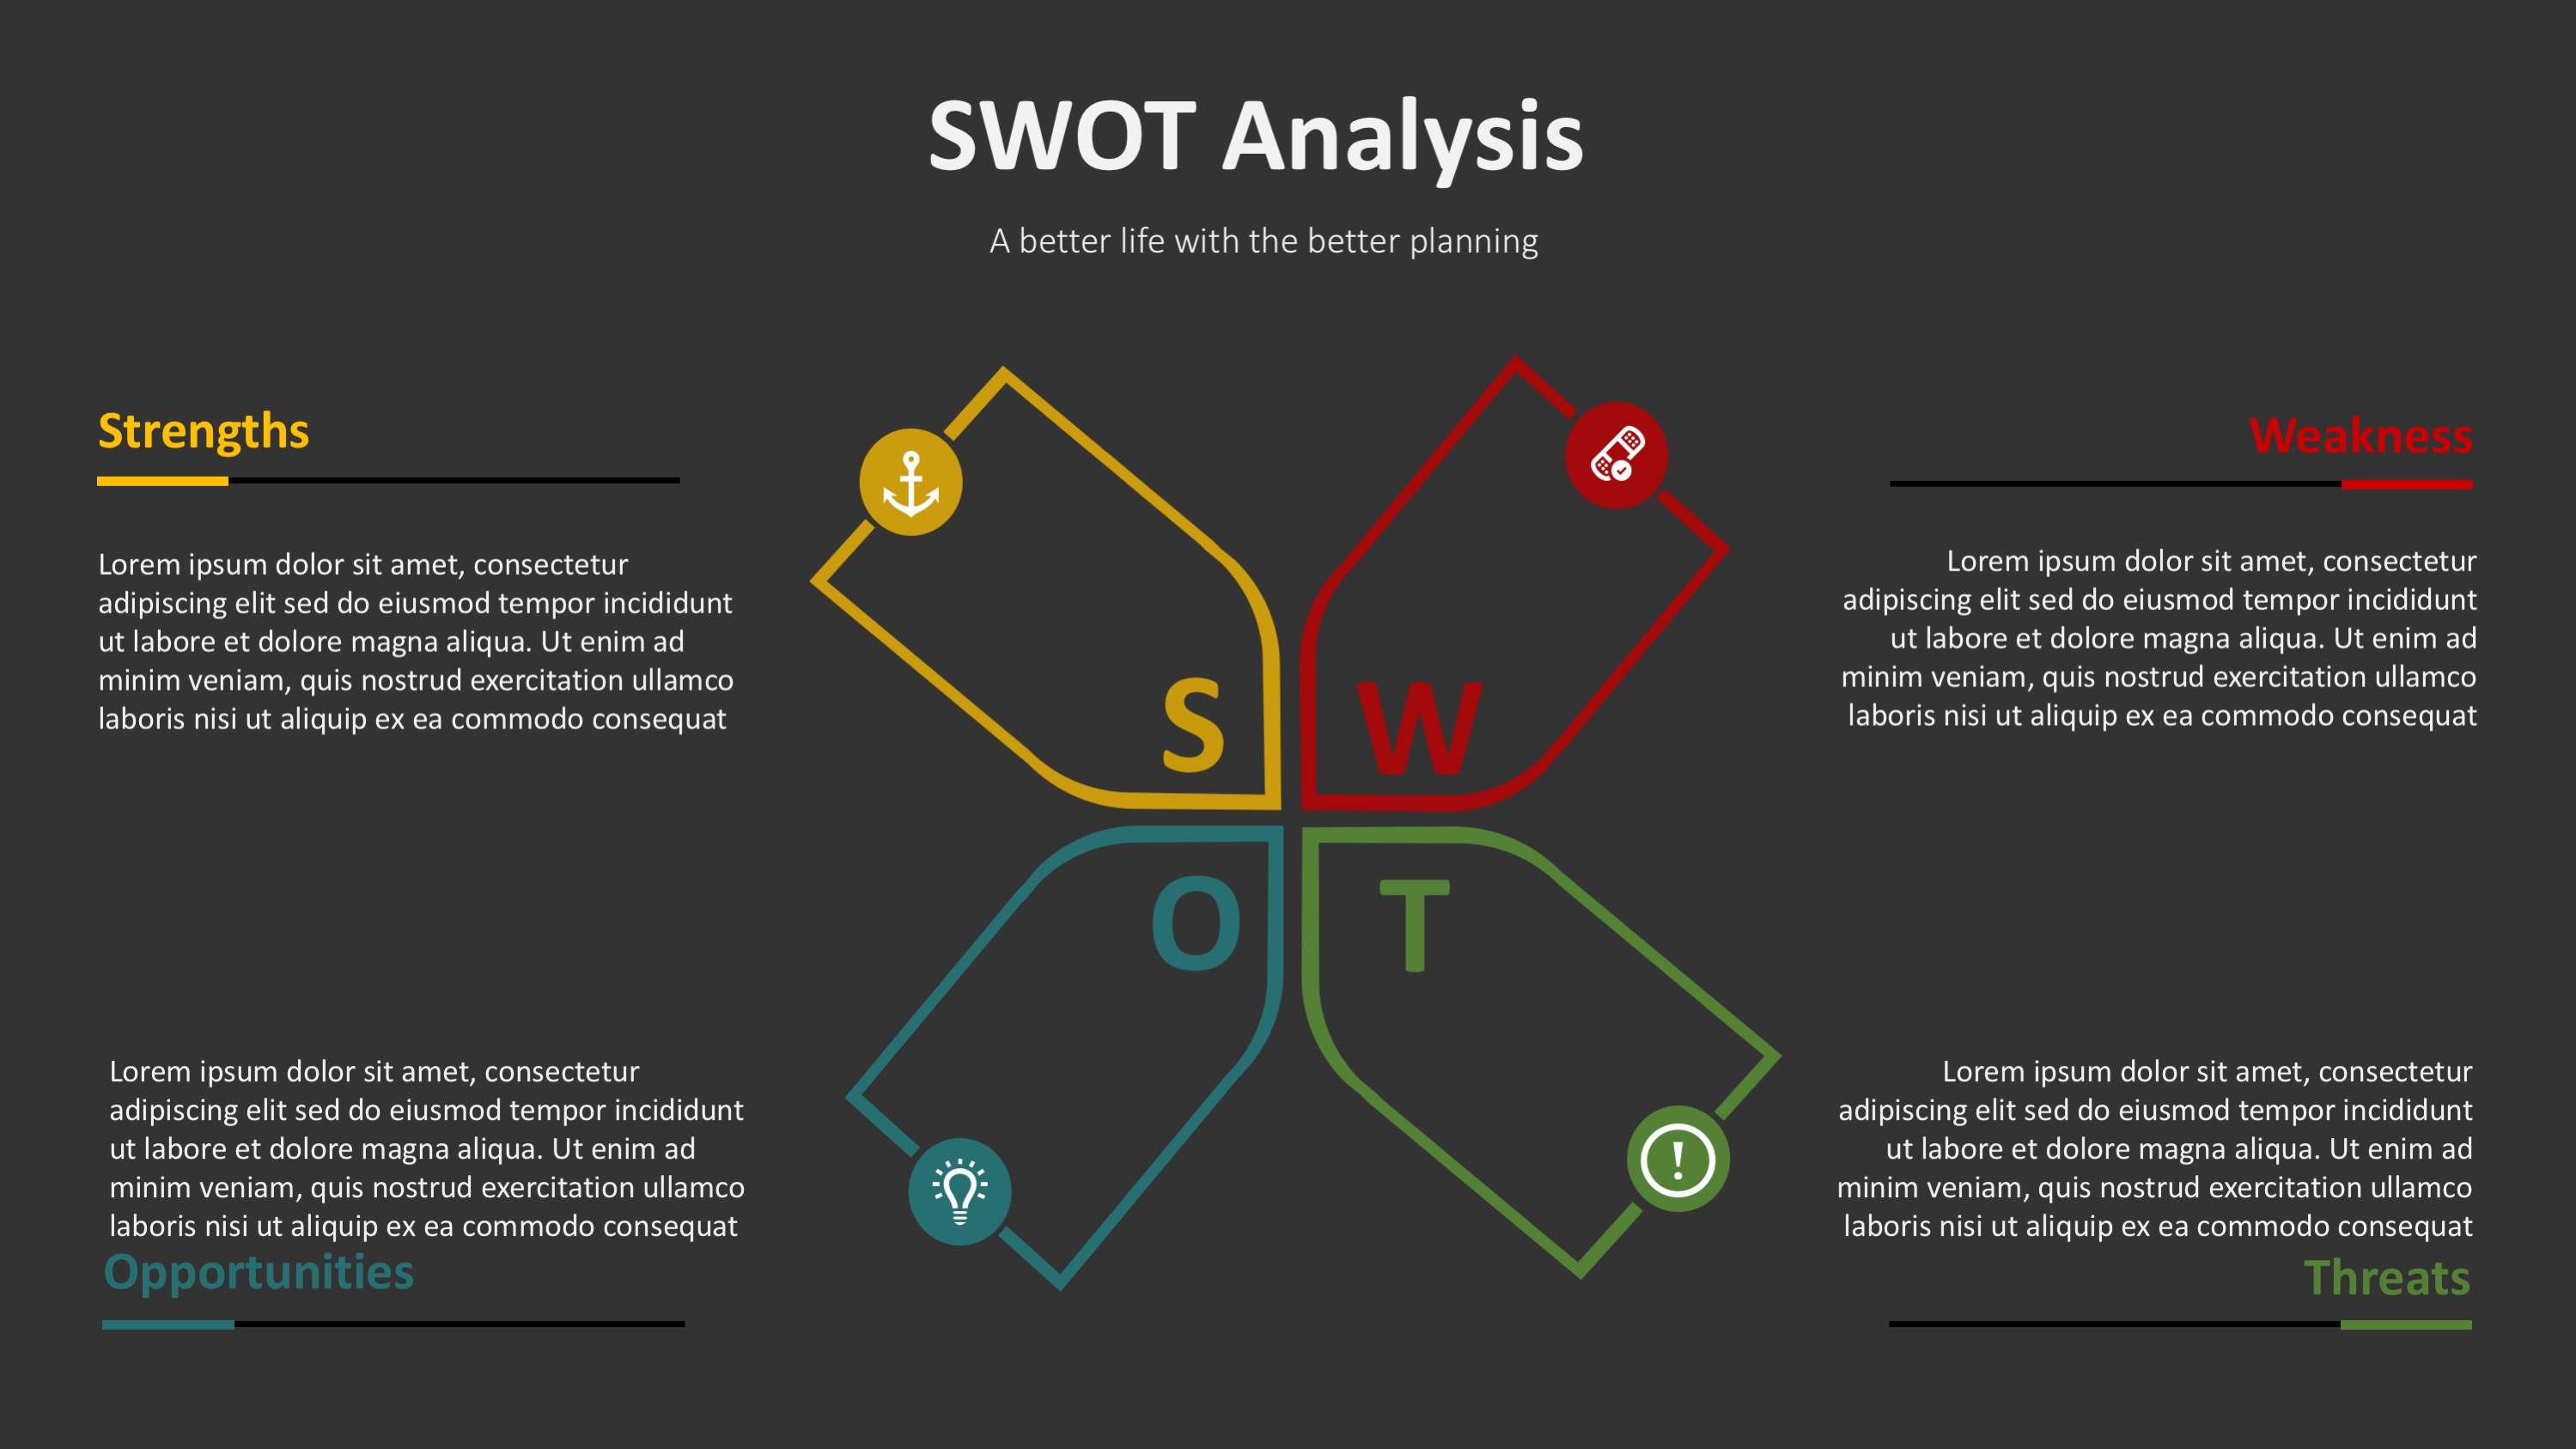 PPT Template for SWOT Analysis With Thin Borders and Editable Icons.